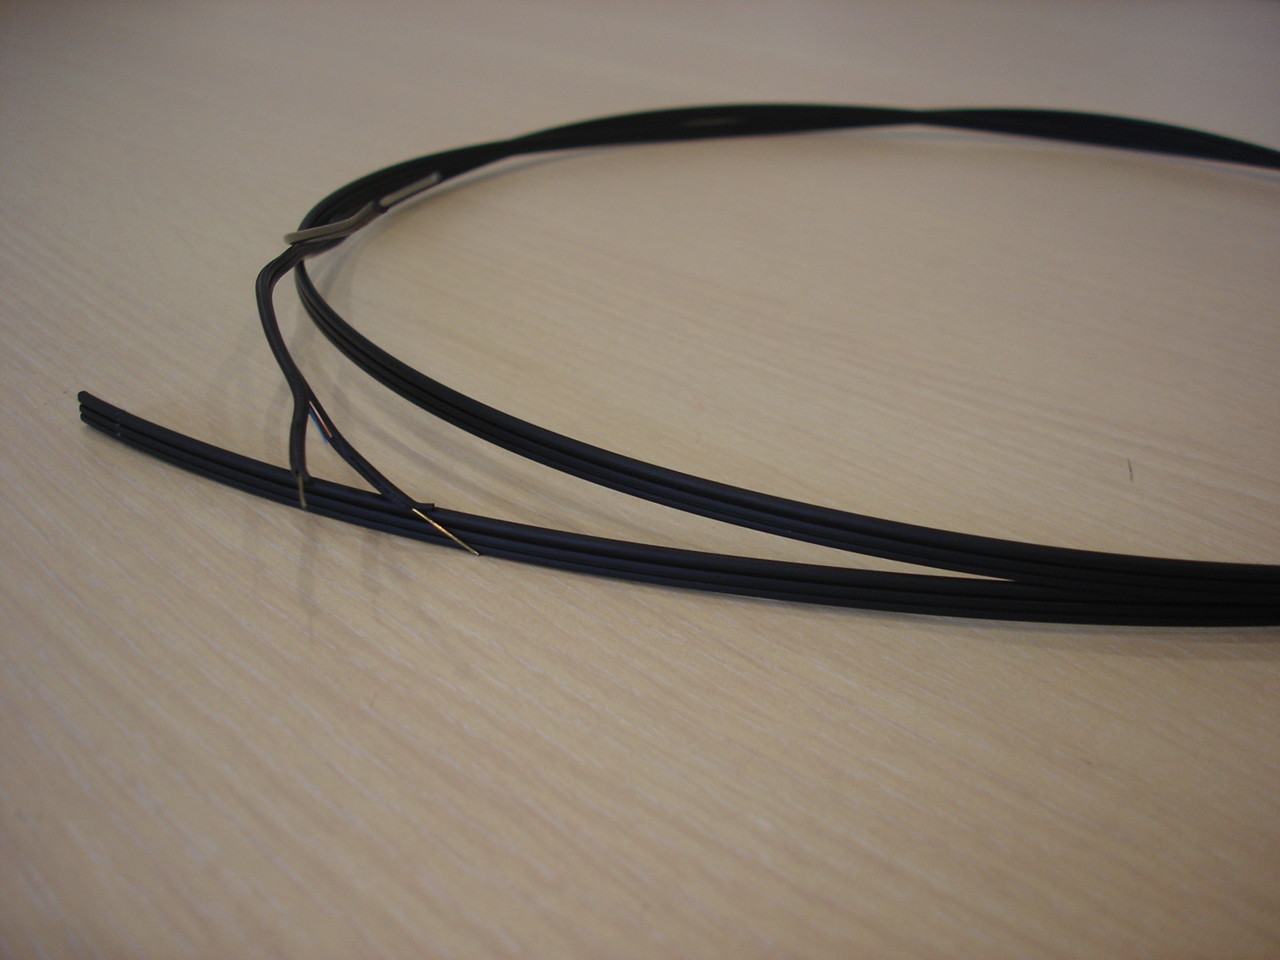  Low Loss Bow Type Drop Cables For Access Network Gjxfh Gjxh Optical Cable Manufactures